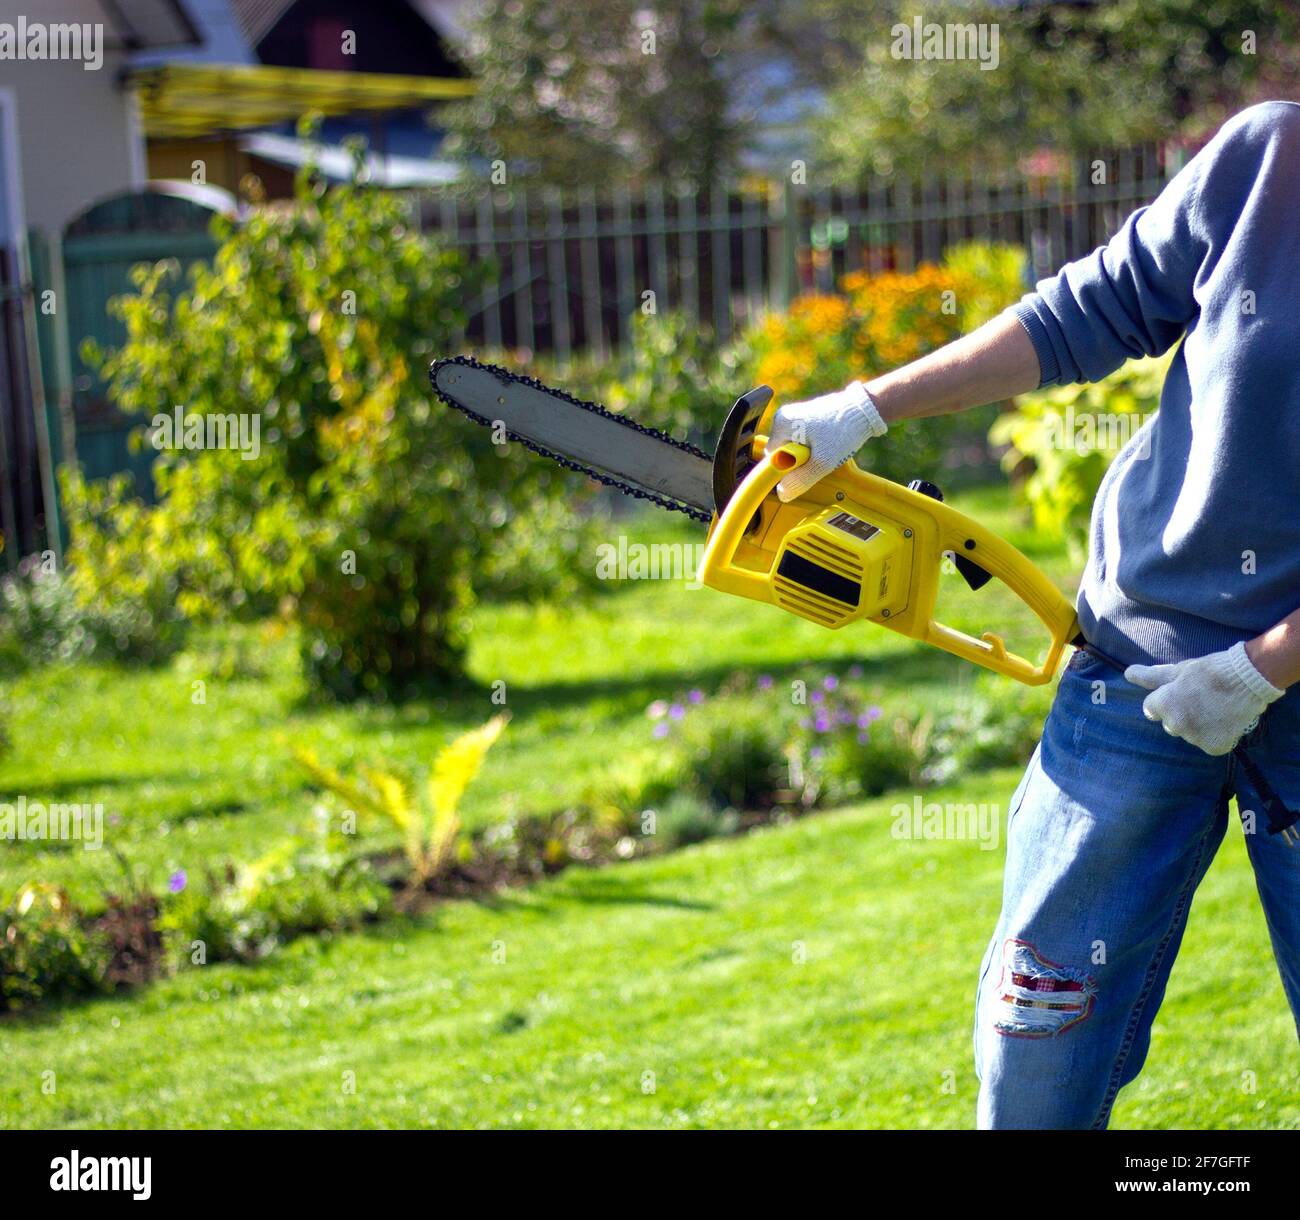 women's hands with a yellow gasoline saw in the open air. the concept of gardening and construction work in the garden and vegetable garden. Stock Photo